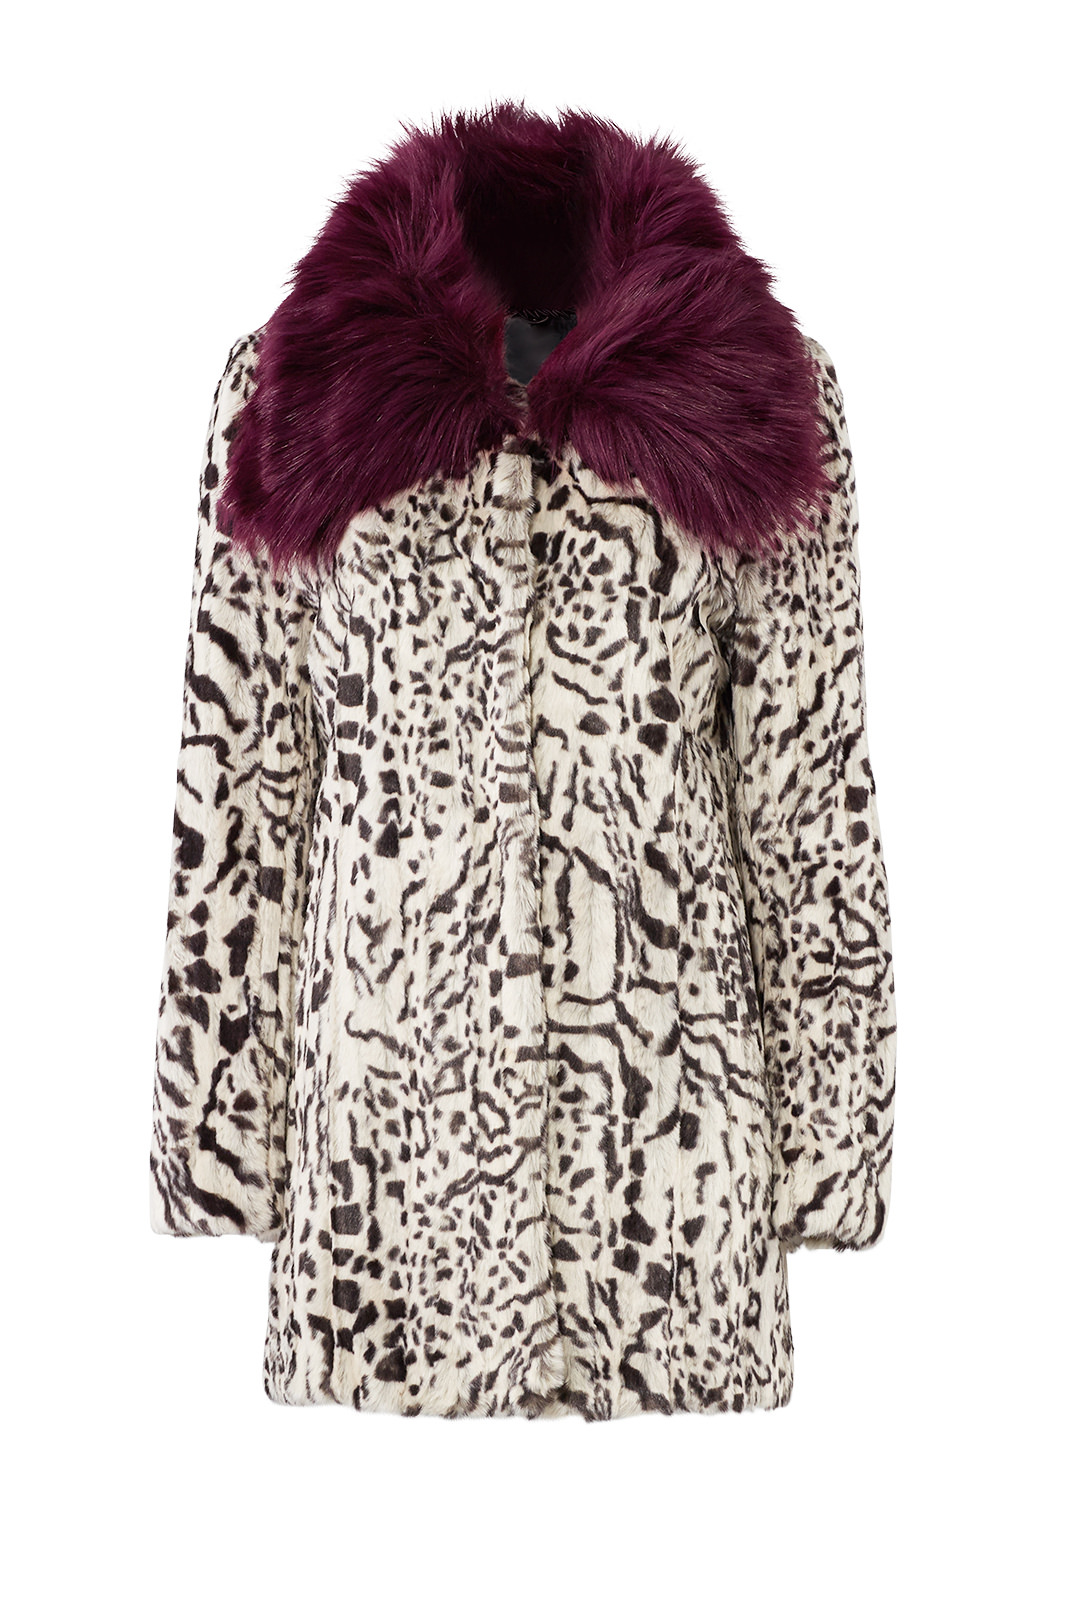 Urban Jungle Coat by Unreal Fur from Rent the Runway